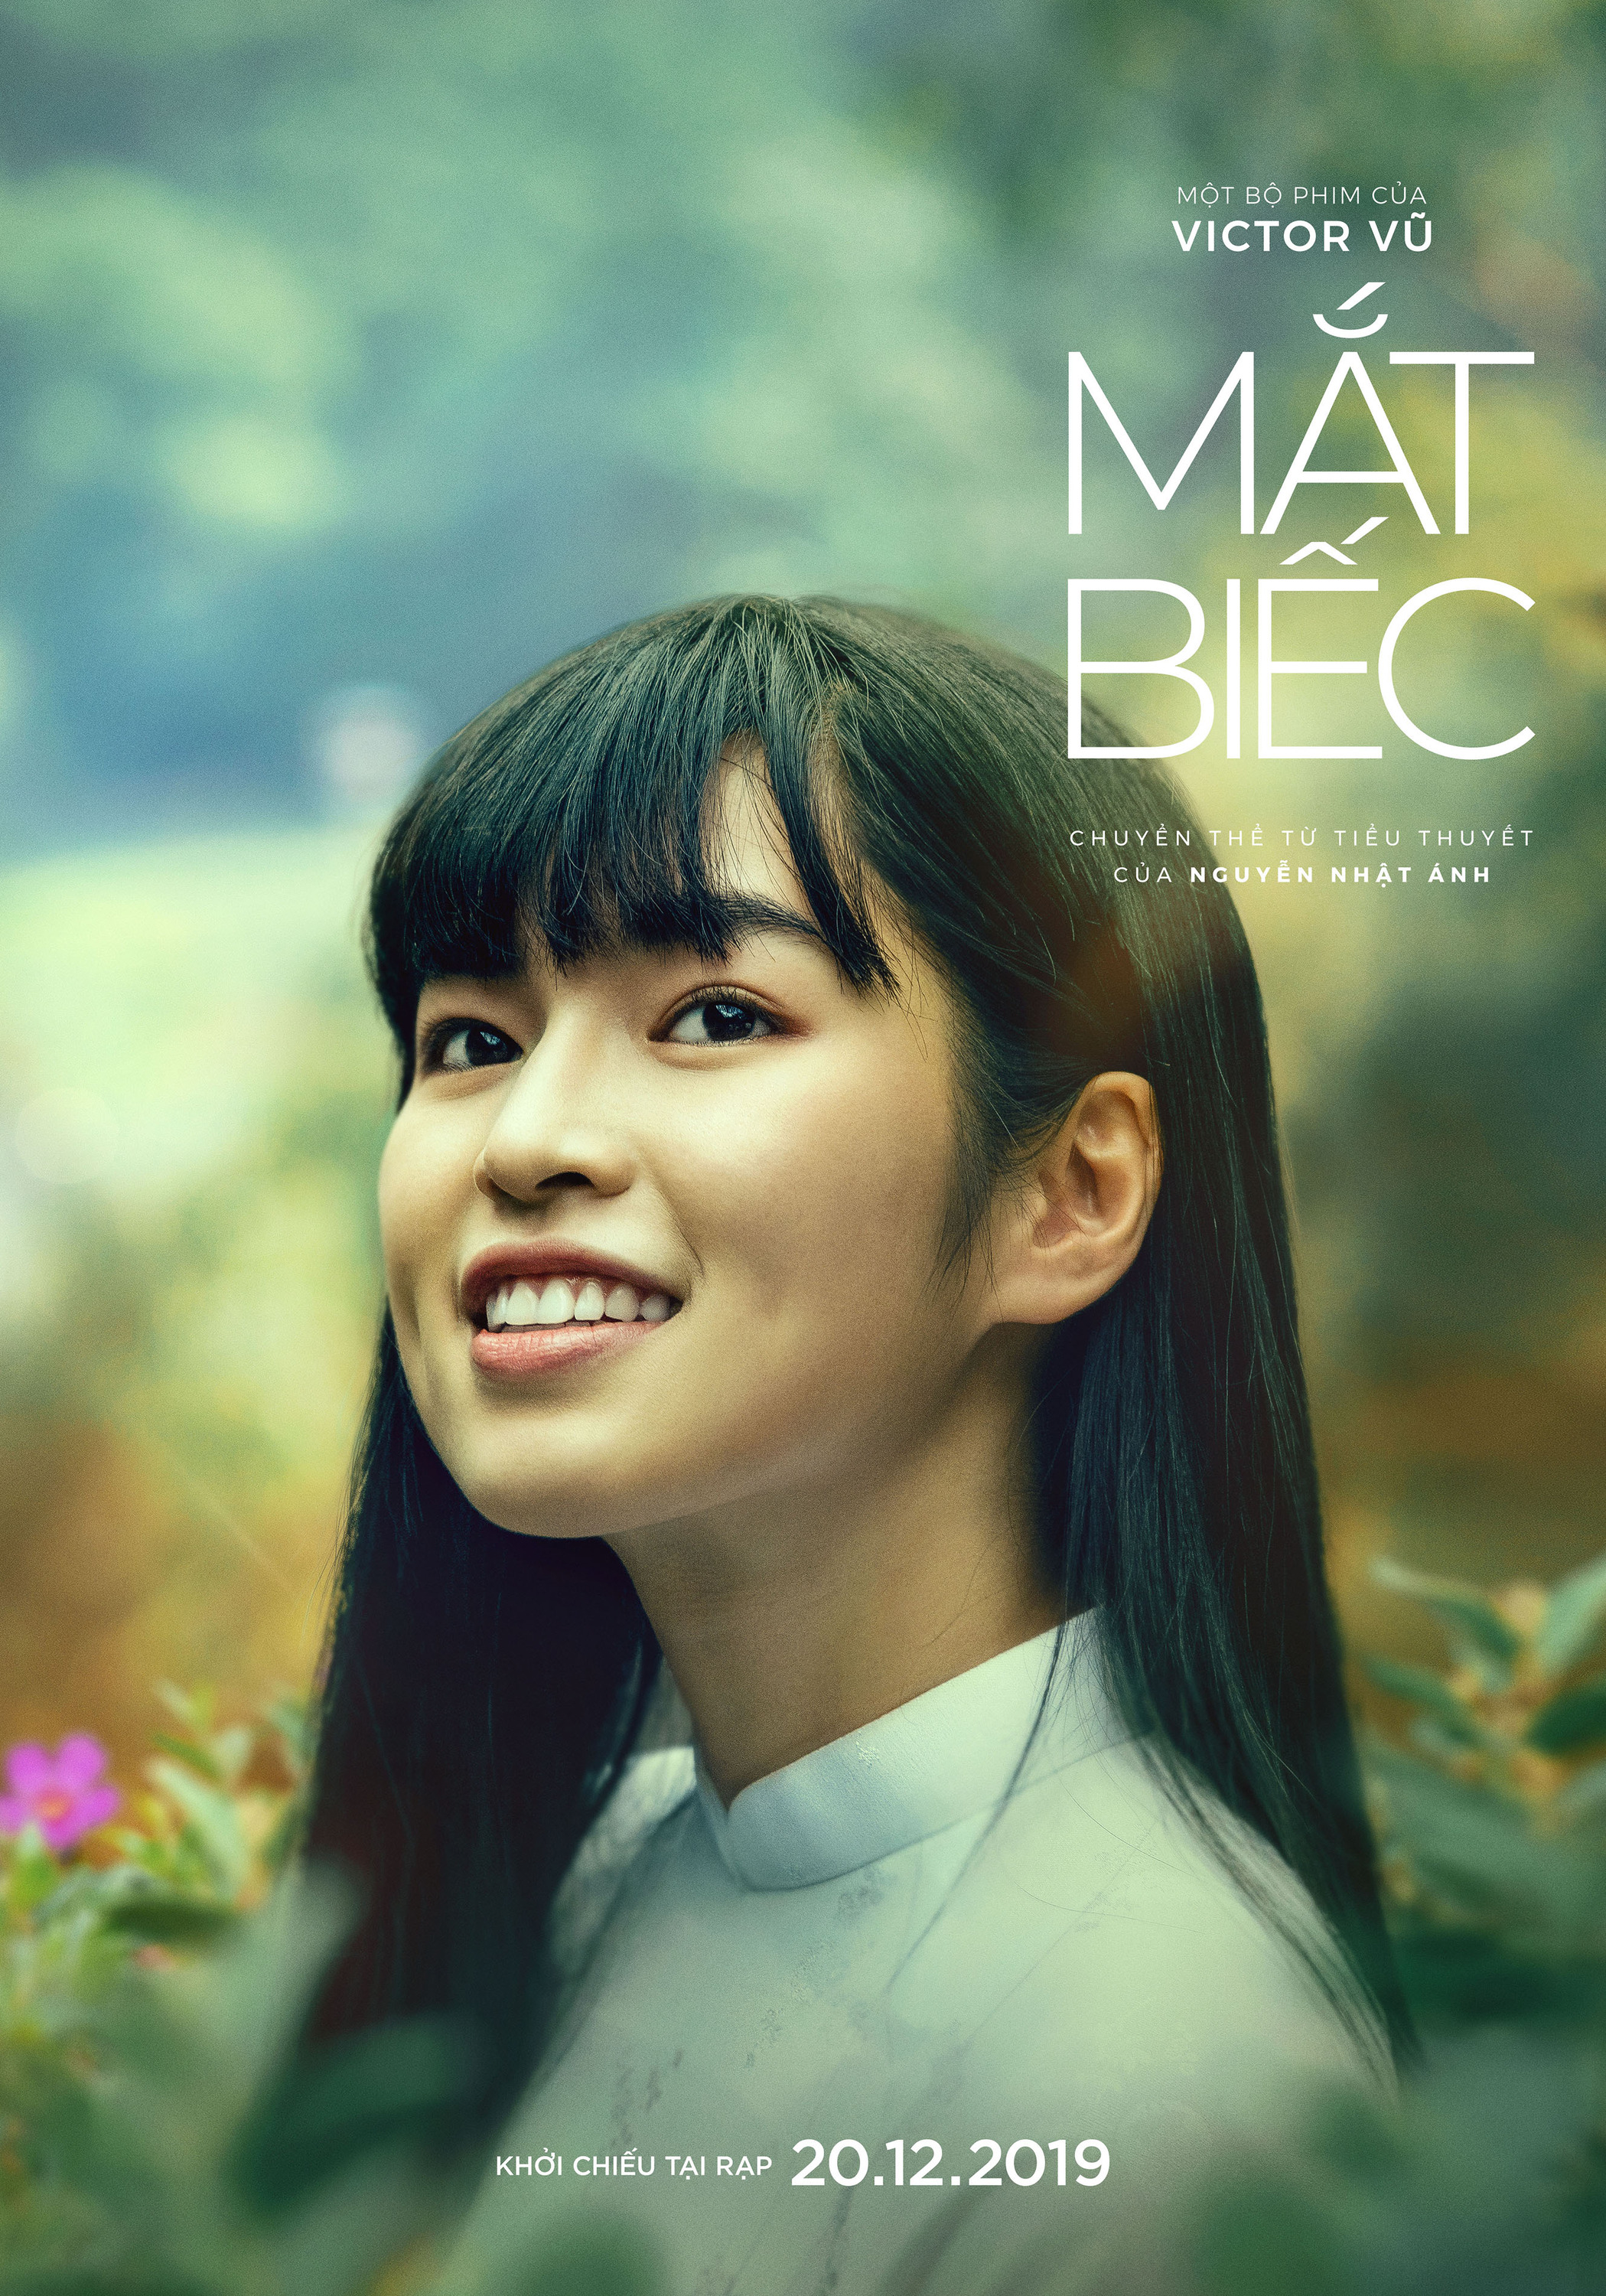 Mega Sized Movie Poster Image for Mat biec (#14 of 15)